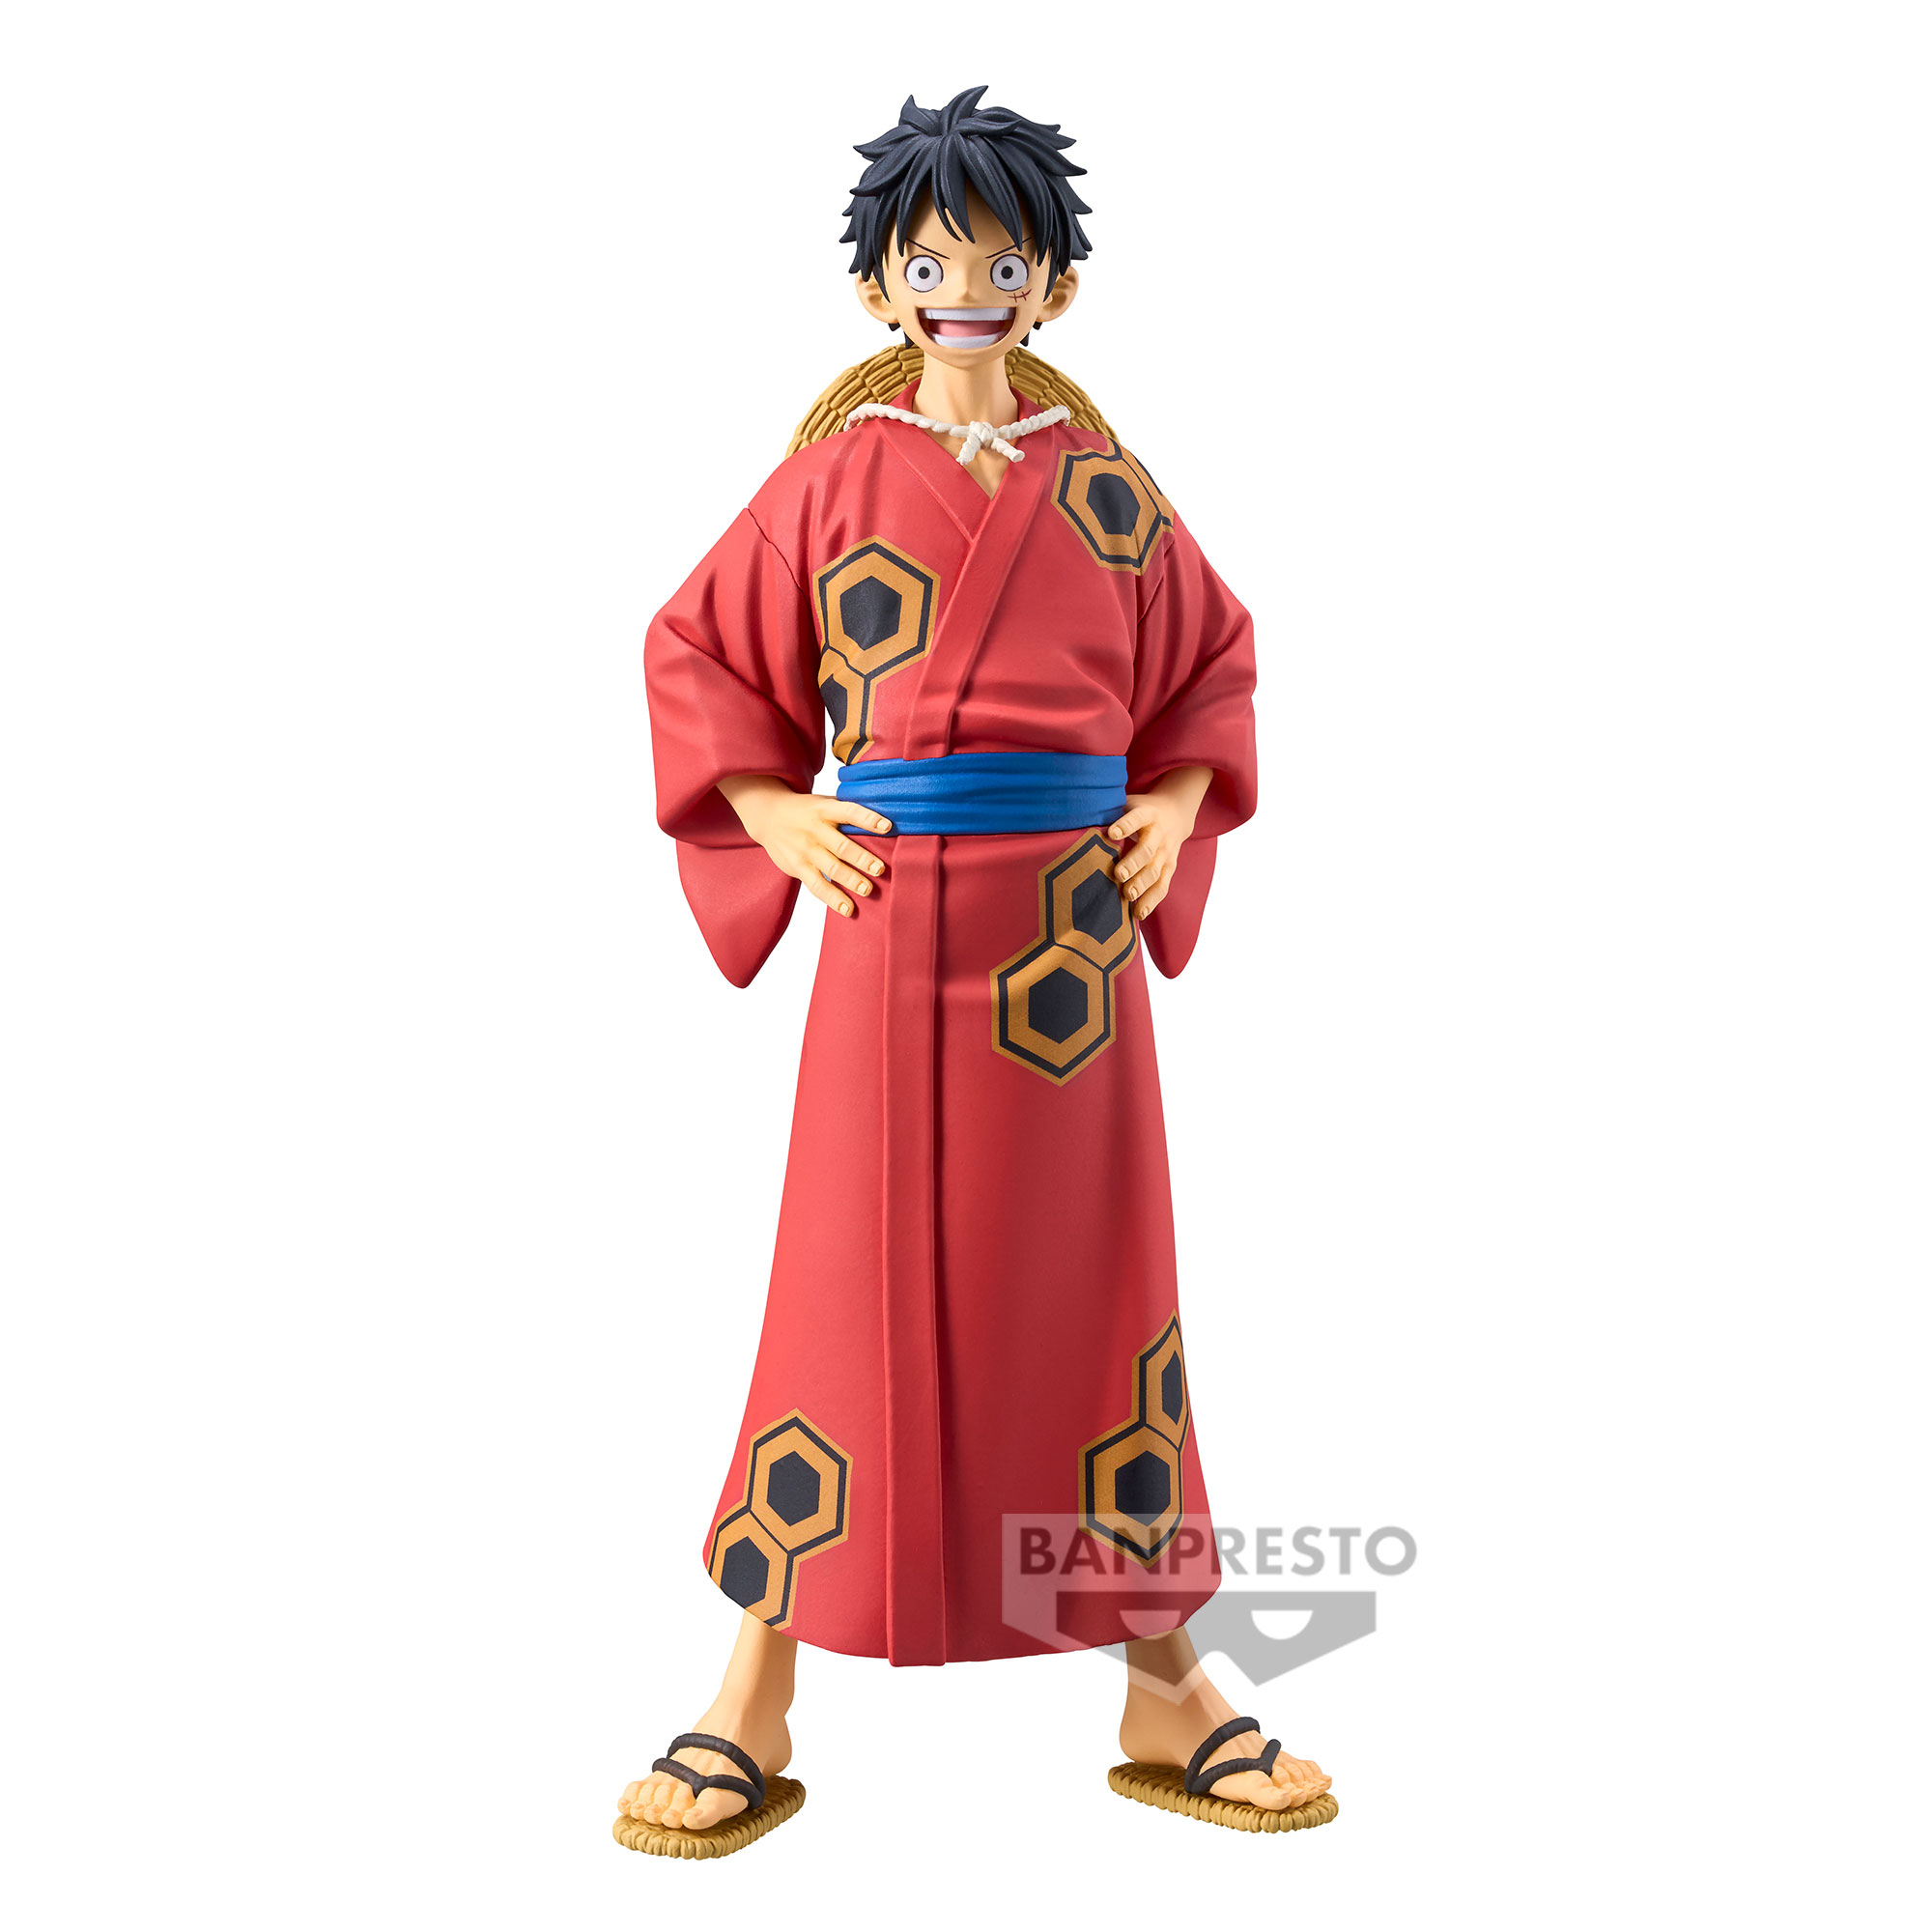 PREORDER - WAVE 111 - One Piece - Luffy - DXF - 16cm PVC Statue